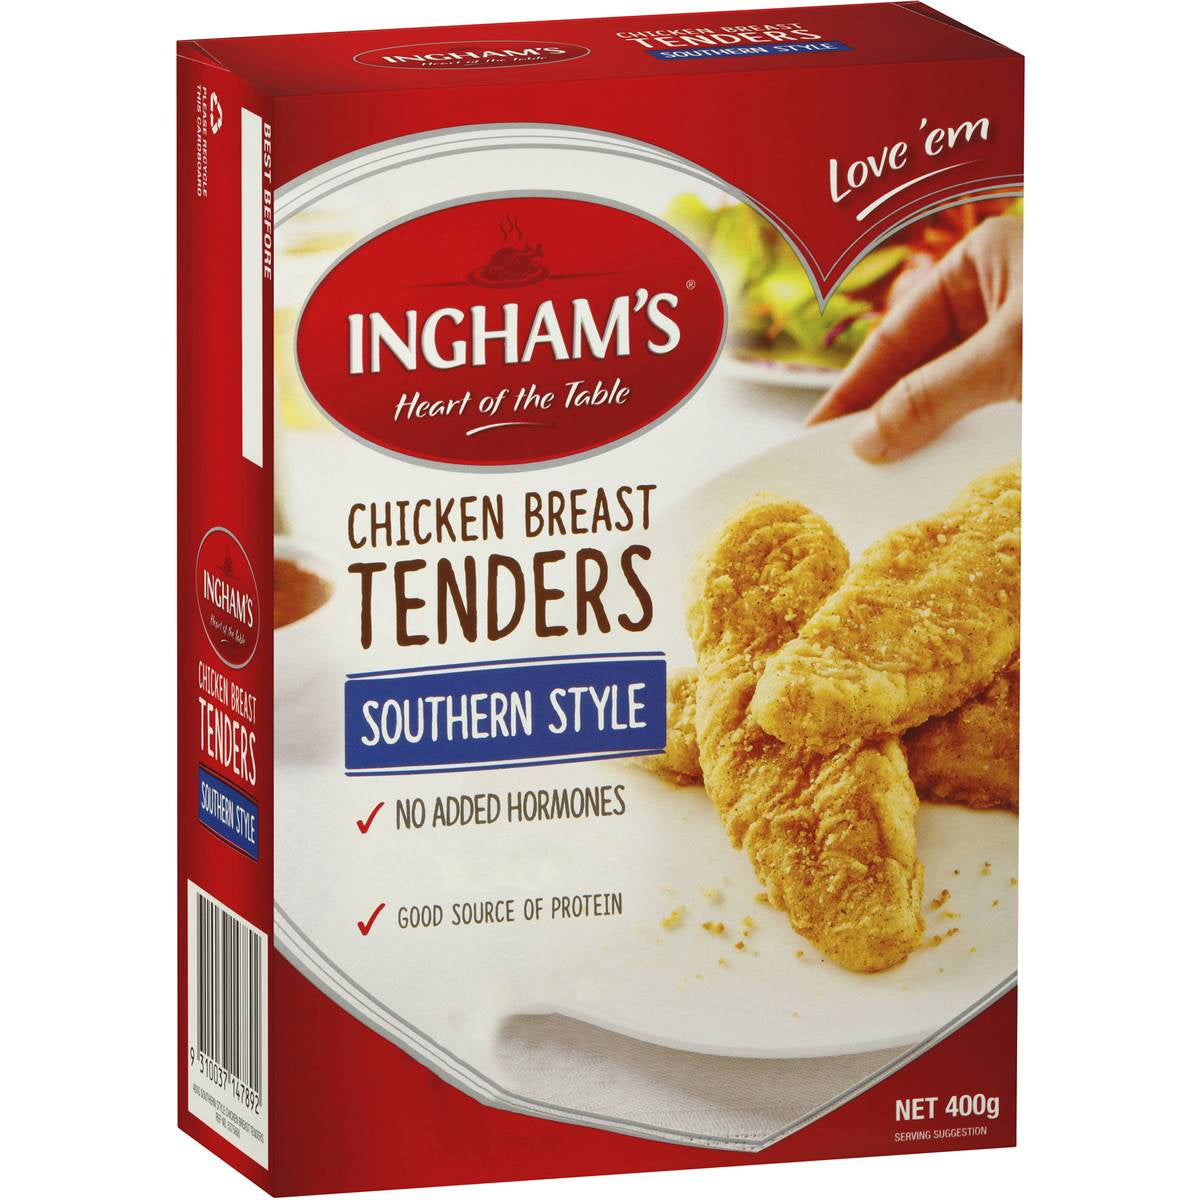 Ingham's Chicken Breast Tenders Southern Style 400g